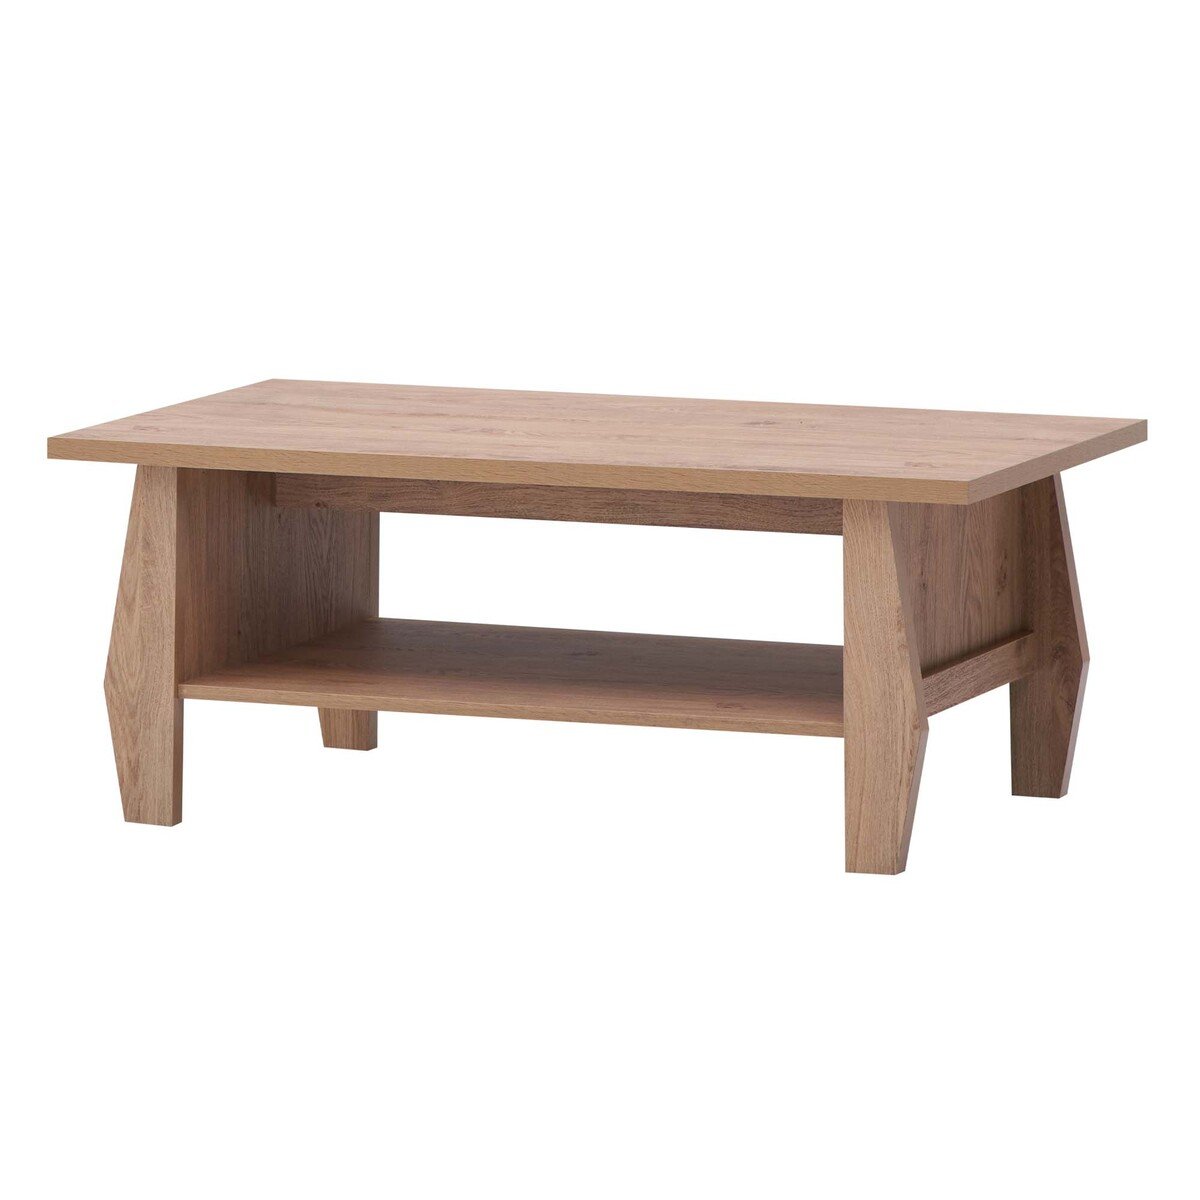 Maple Leaf Wooden Coffee Table CT1100 Oak/White